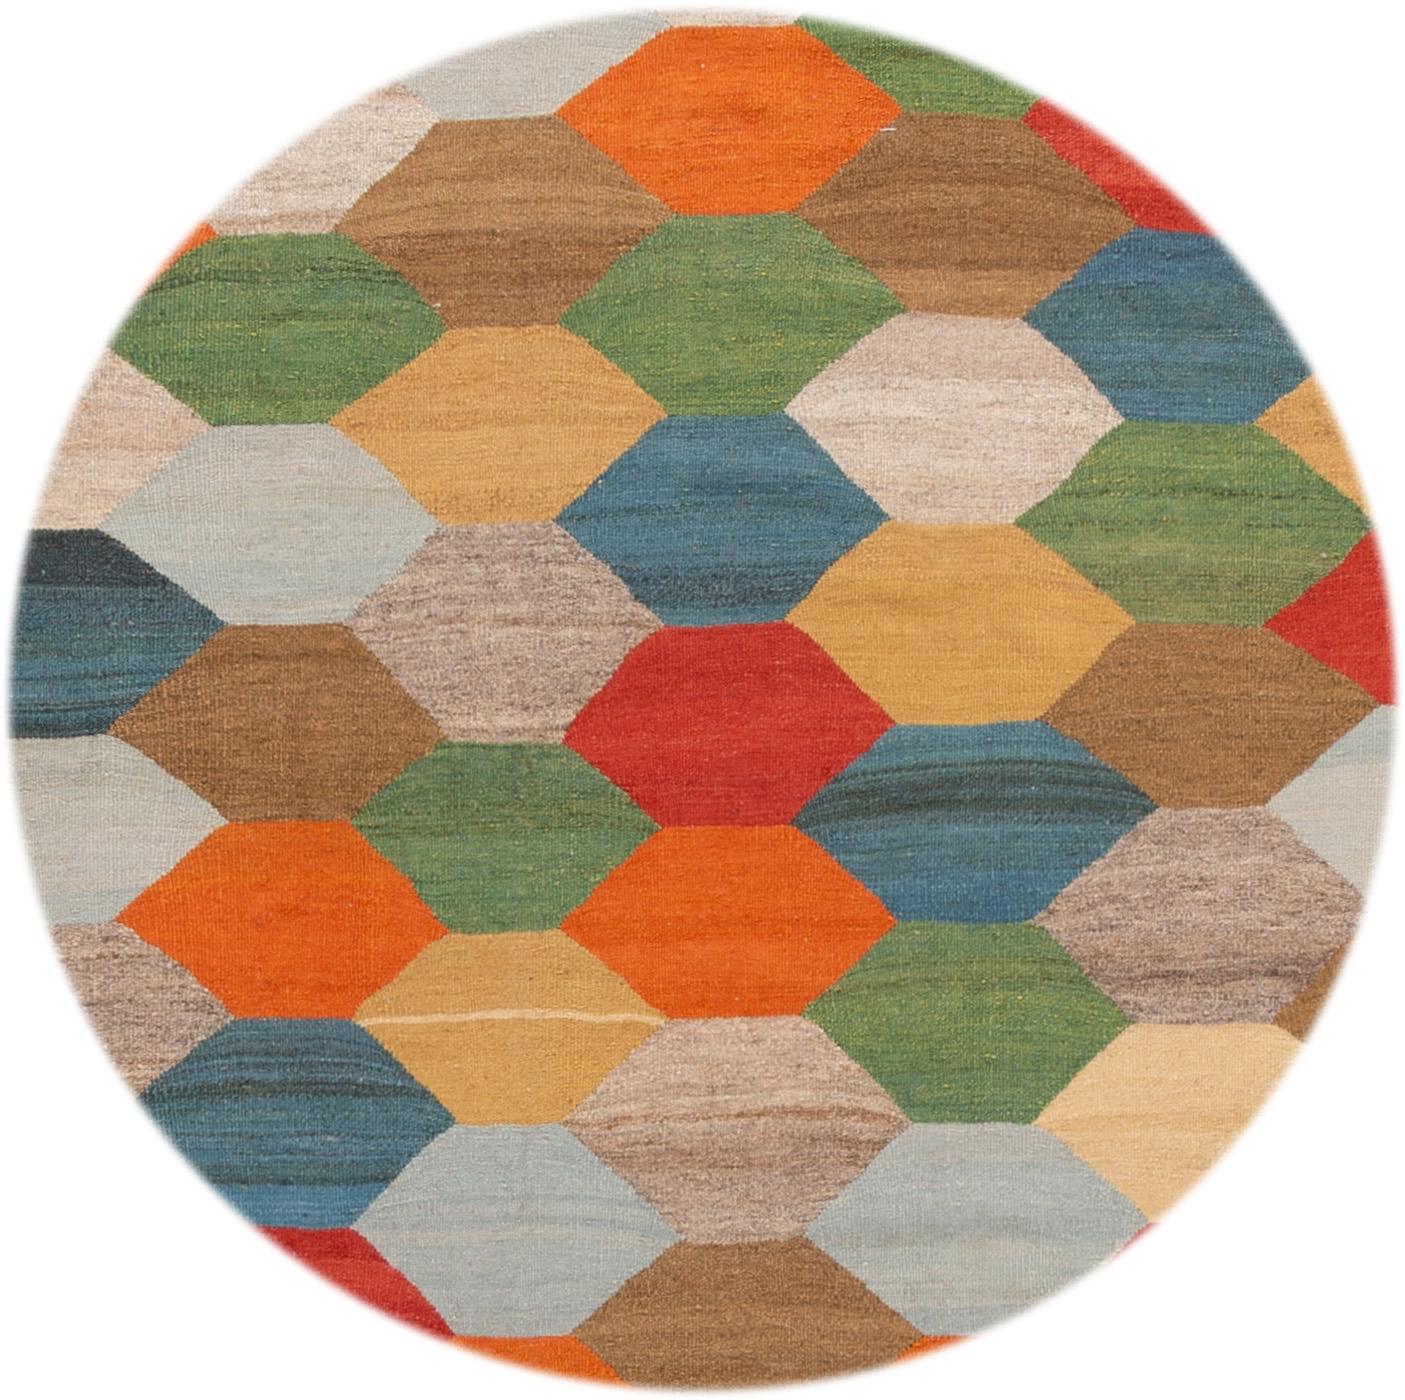 Beautiful hand knotted modern wool Kilim rug. This rug is multicolored in an all-over geometric design.

This rug measures: 8'5